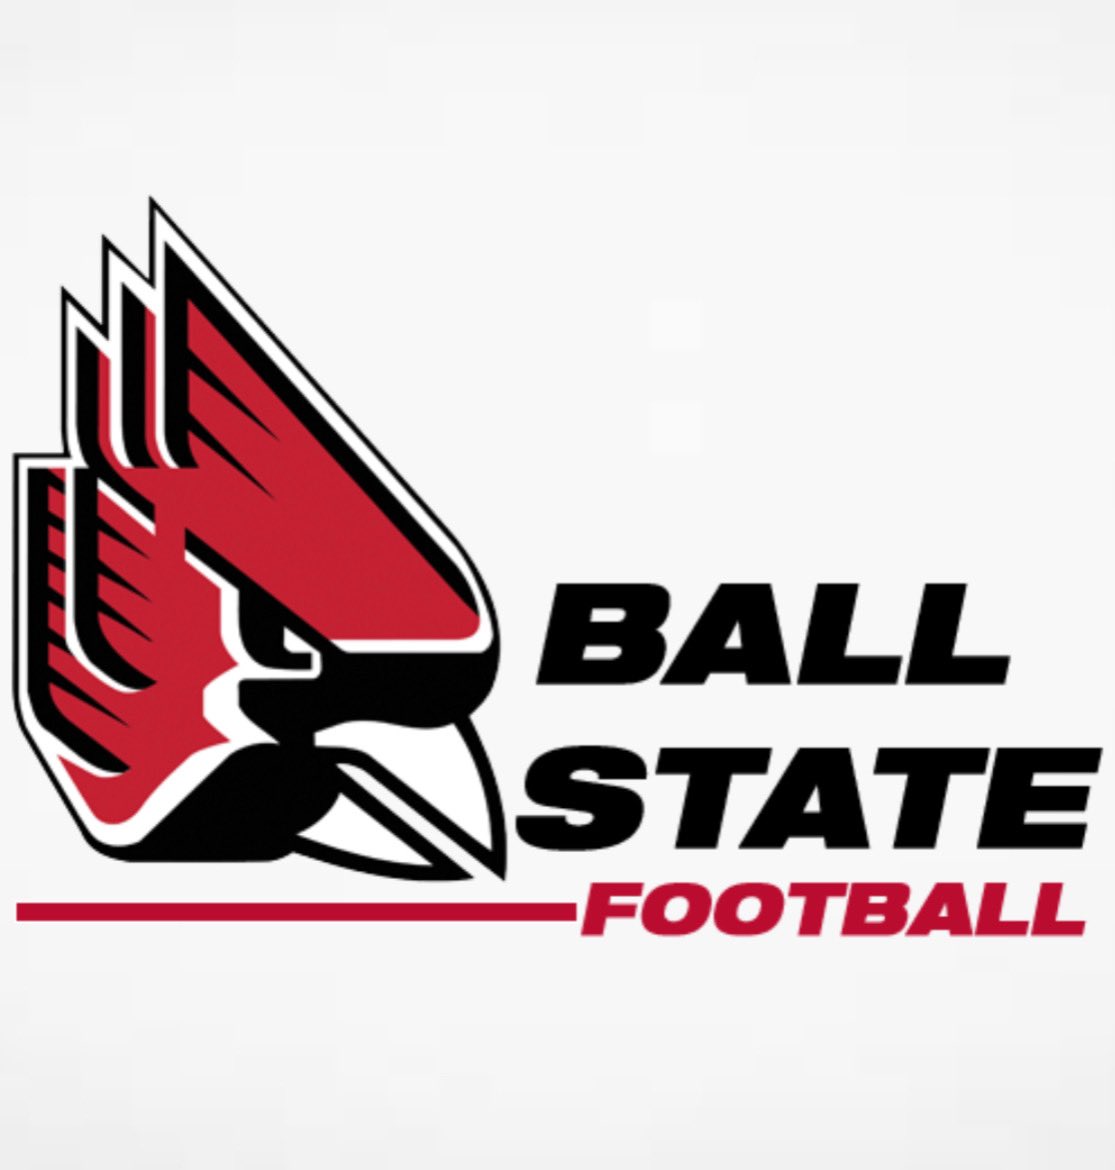 ALL GLORY TO GOD! After a Great Conversation With @coachbeckles I am Extremely Blessed to Have Earned my 3rd Division 1 Offer from Ball State! @BallStateFB @MiltonEagles_FB @CoachBenReaves @OCCoachJack @coachsylvestri @bsa28_ @RustyMansell_ @MohrRecruiting